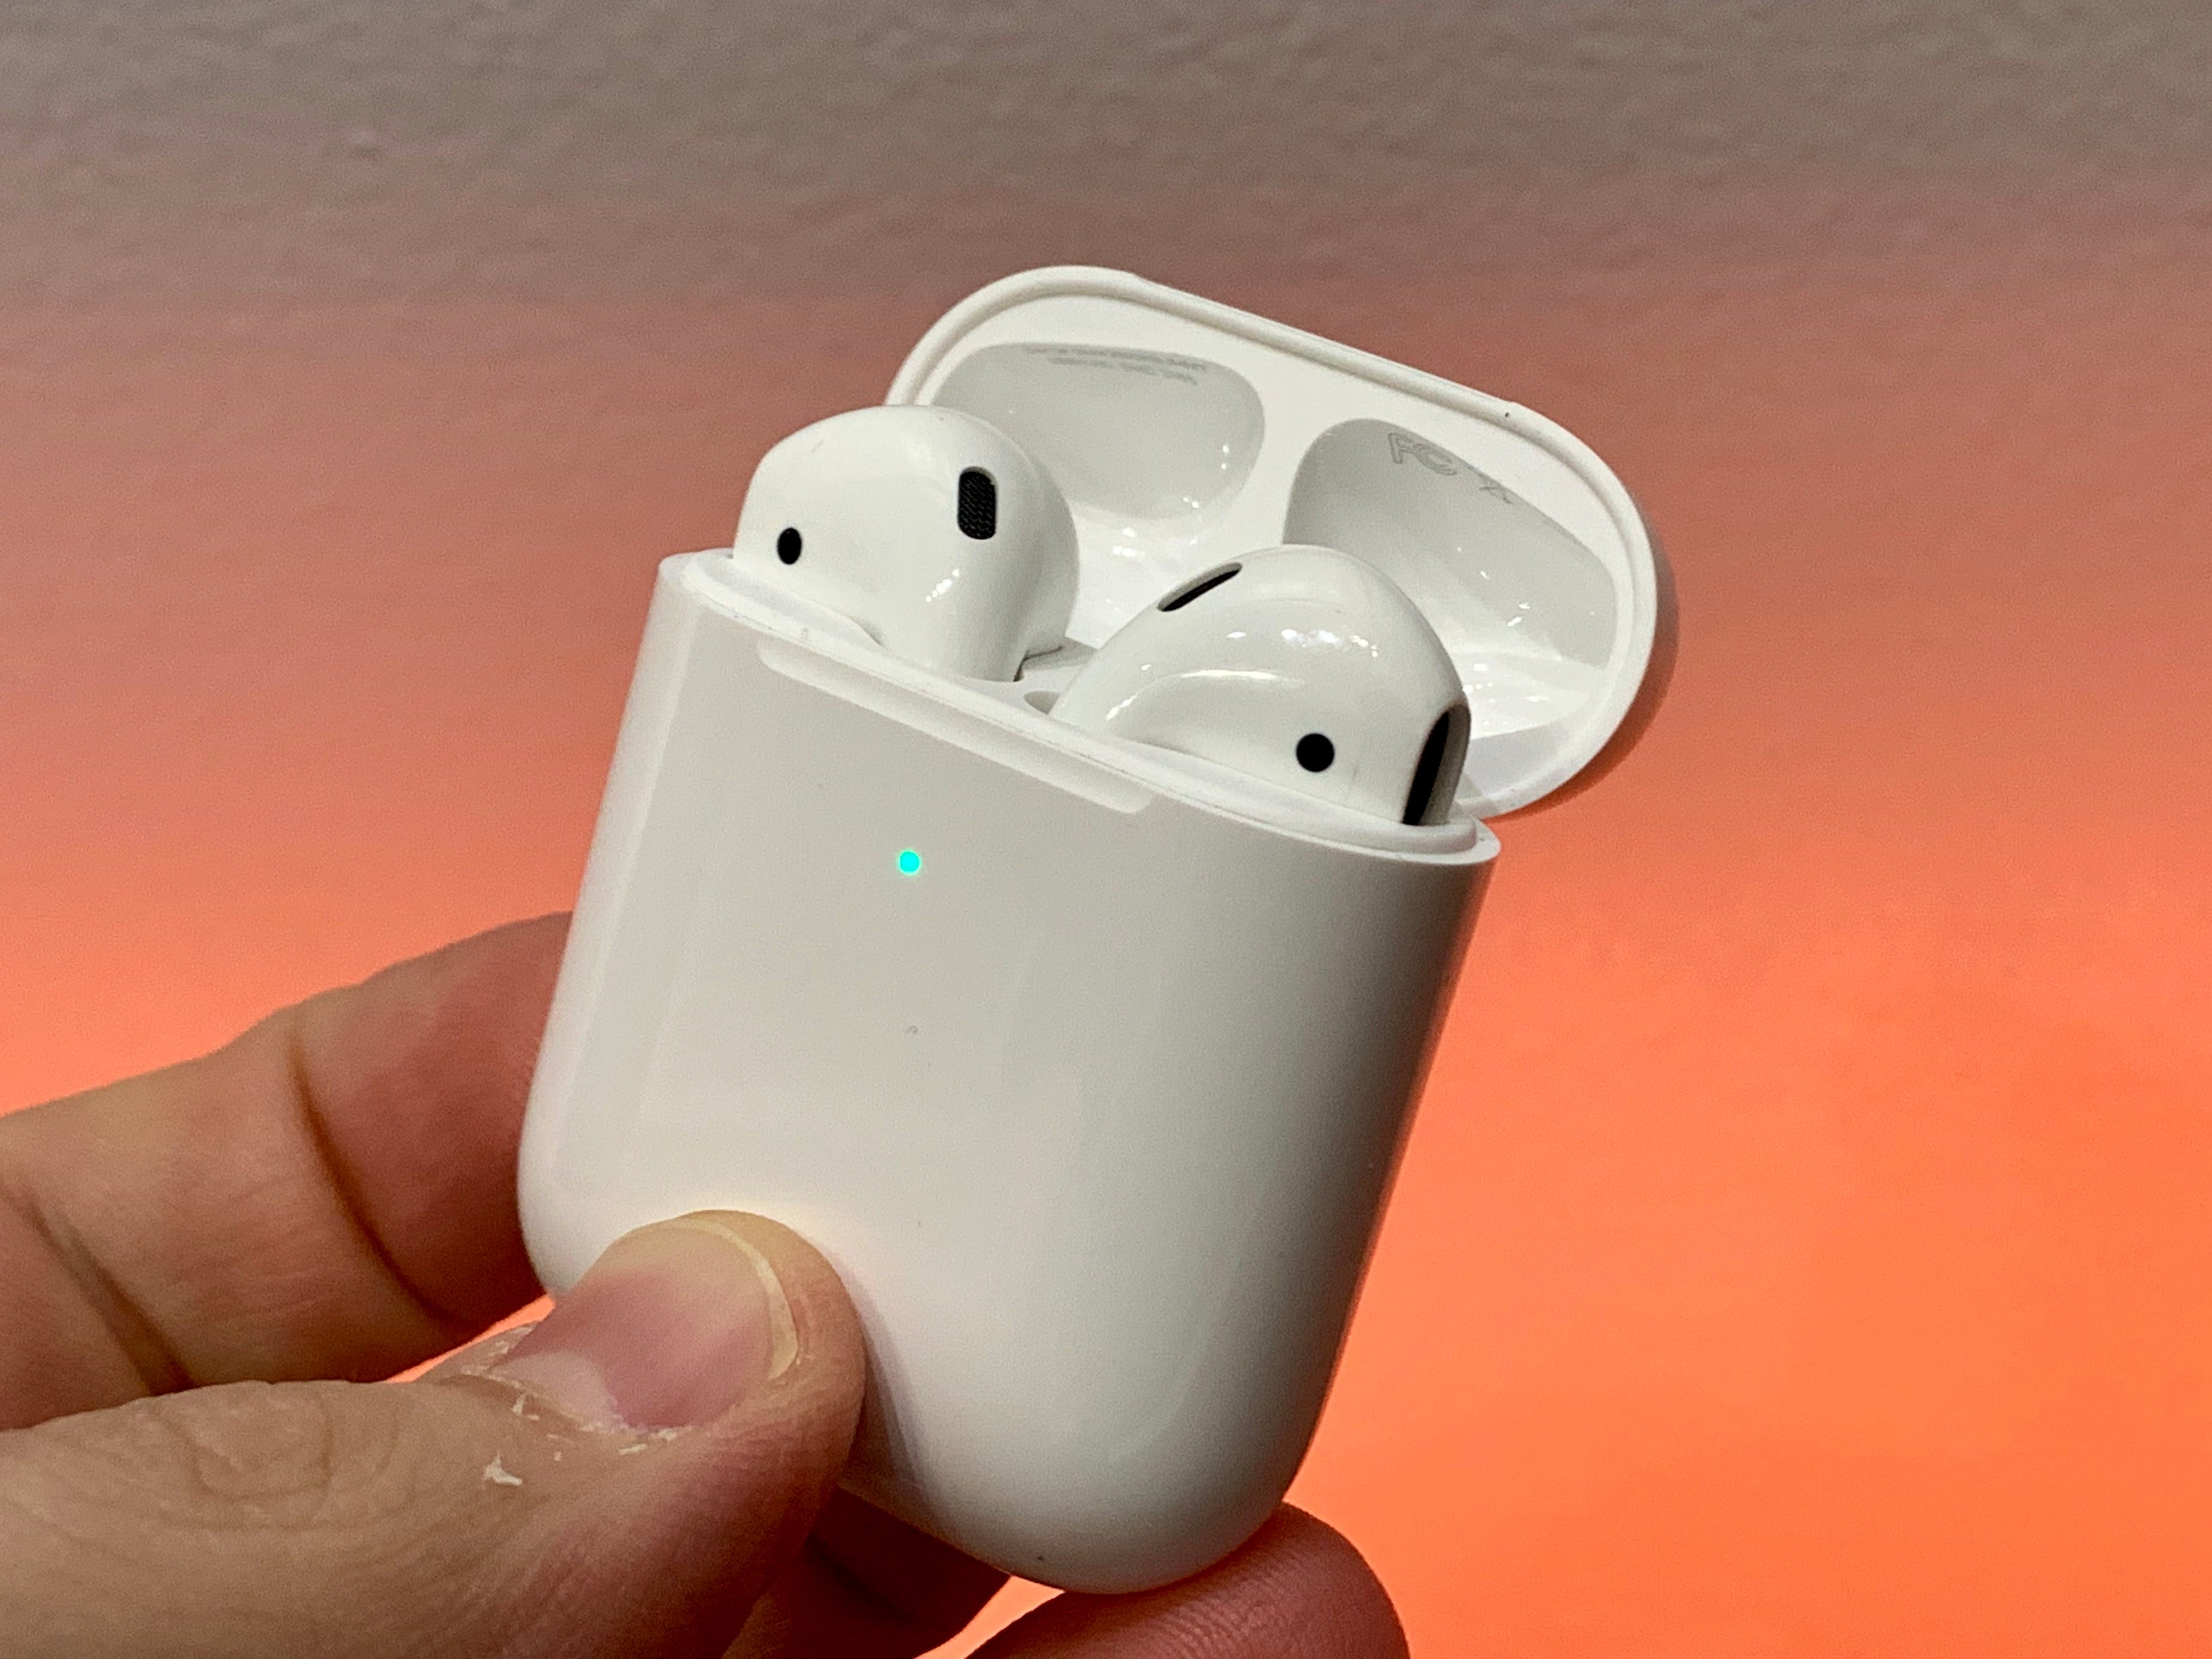 Pods battery pro. Apple AIRPODS 2. AIRPODS 2.2. Apple AIRPODS 2.1. Наушники аирподс 2.